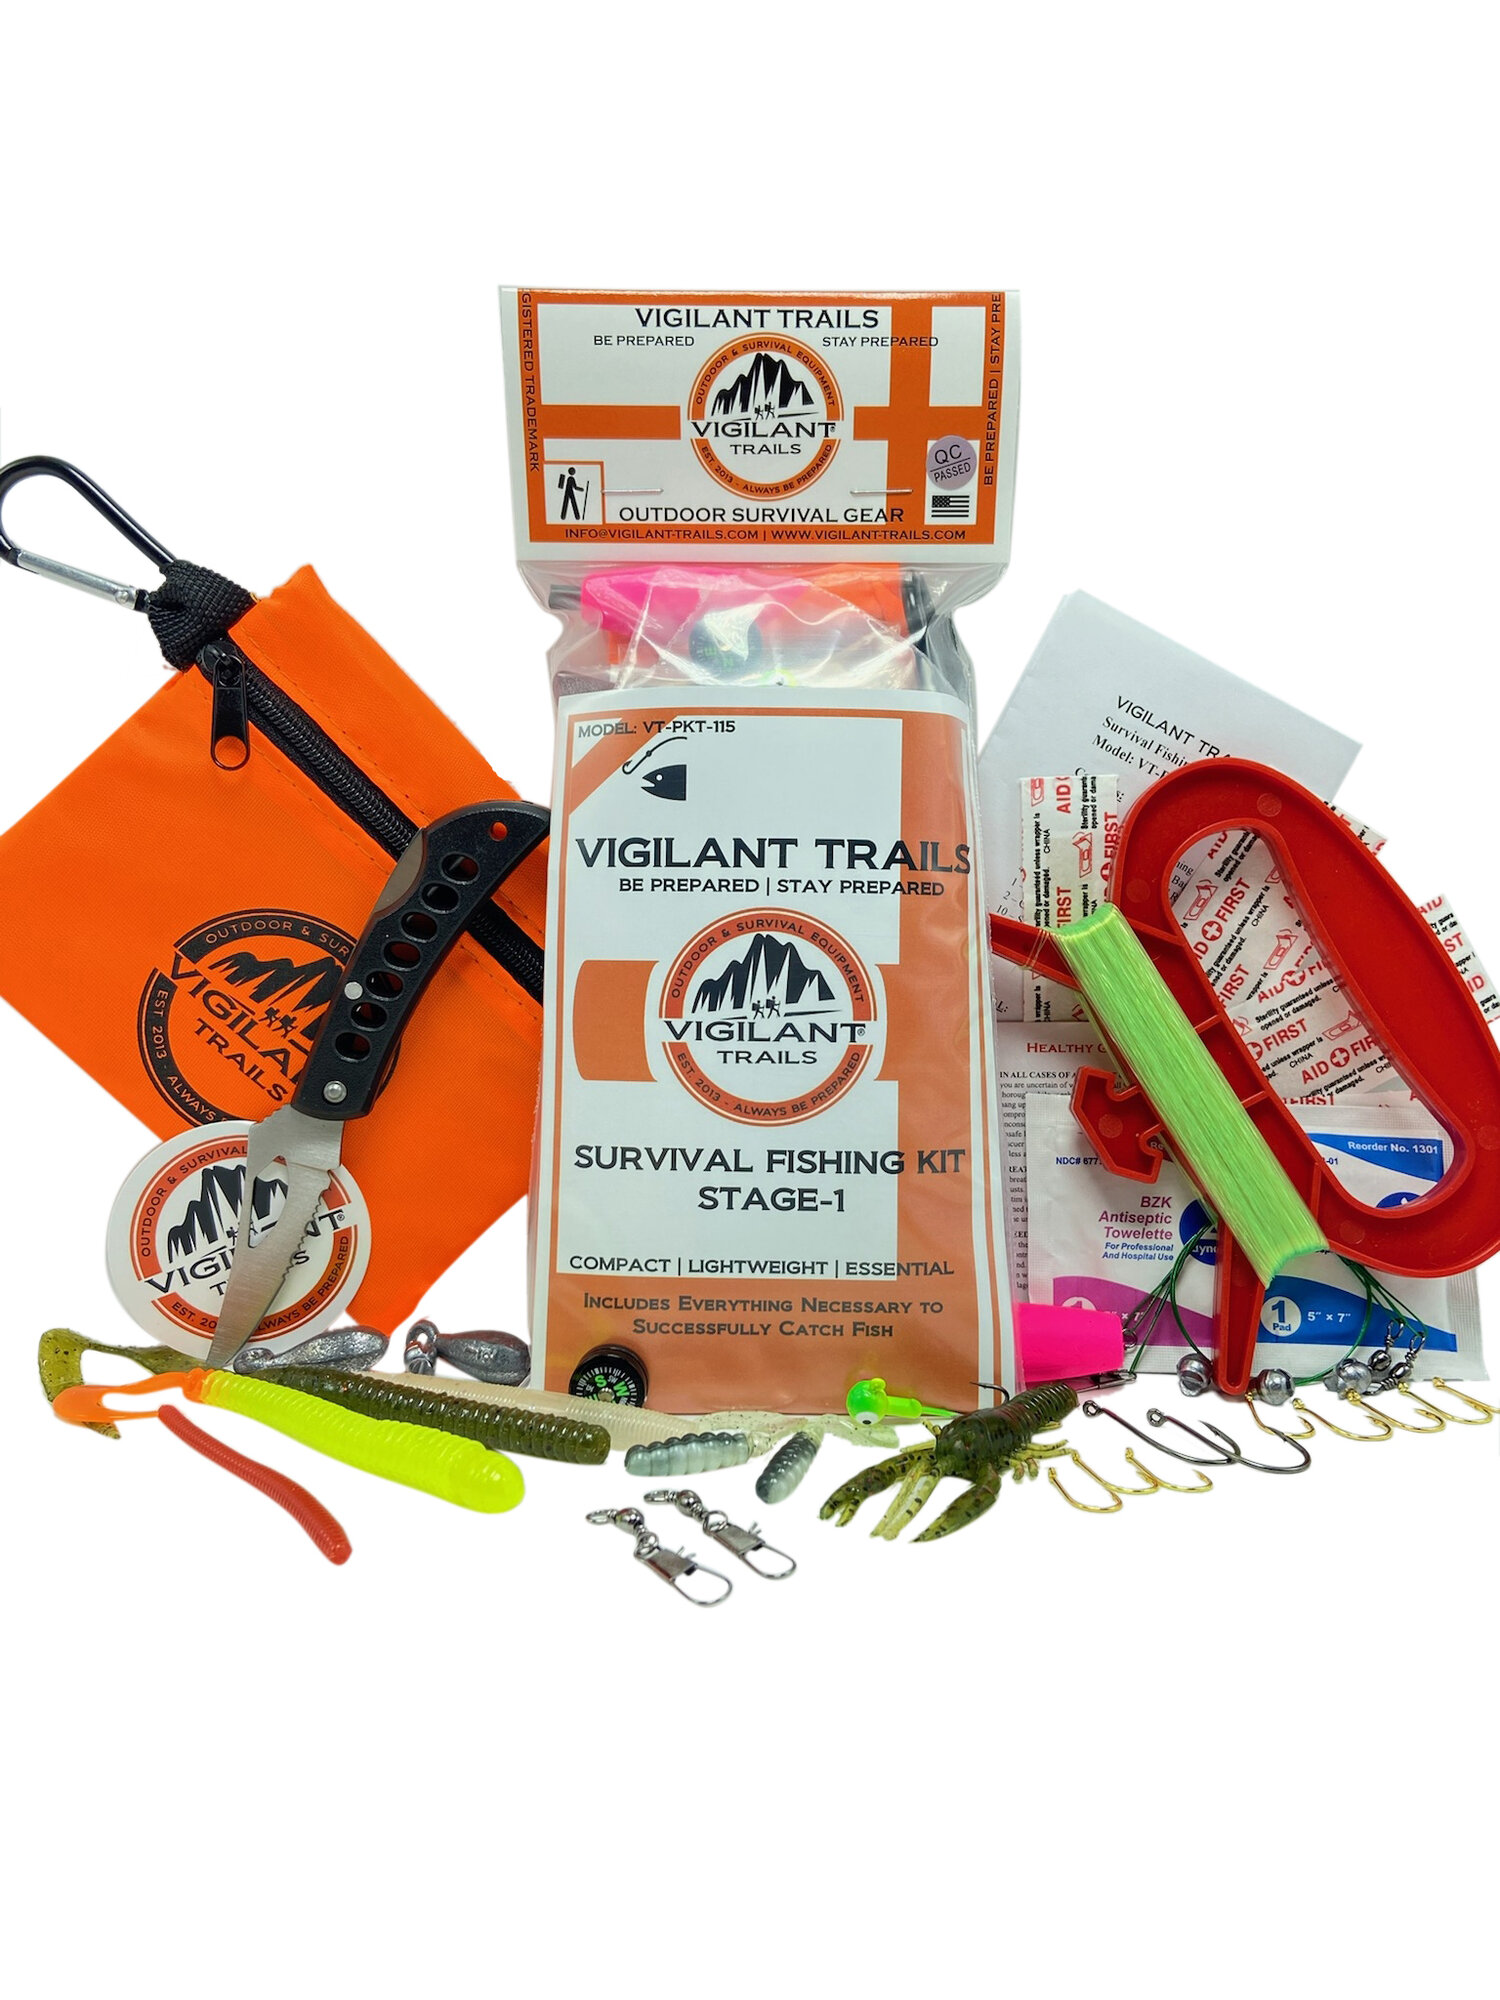 Vigilant Trails Pre-Packed Survival Fishing Kit Stage-1